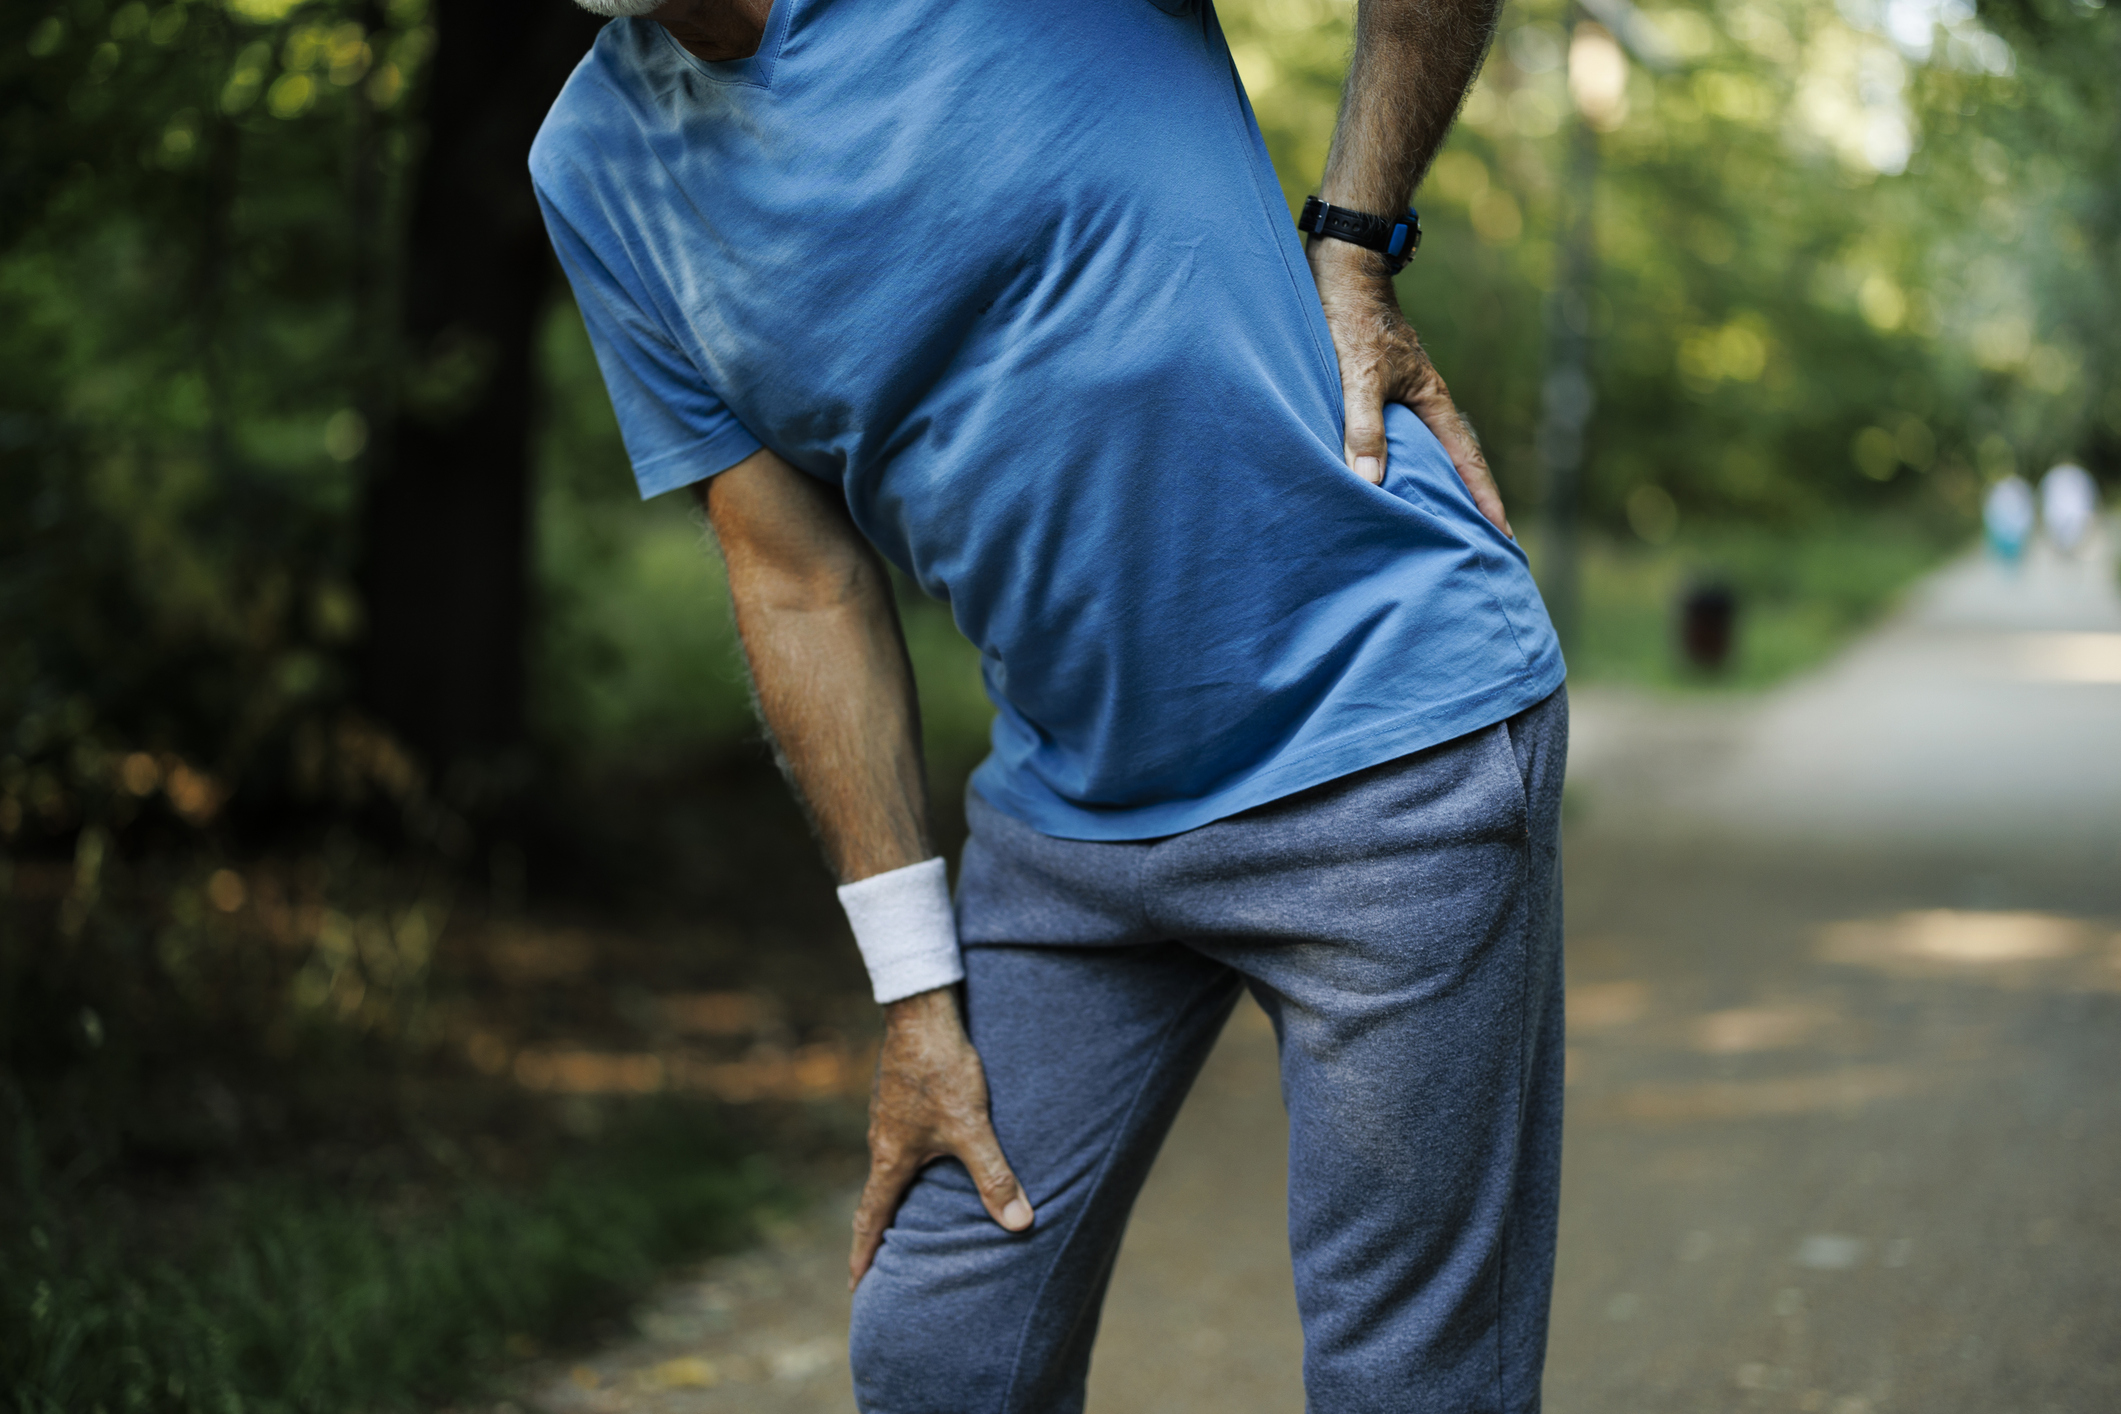 The best exercise to alleviate knee pain